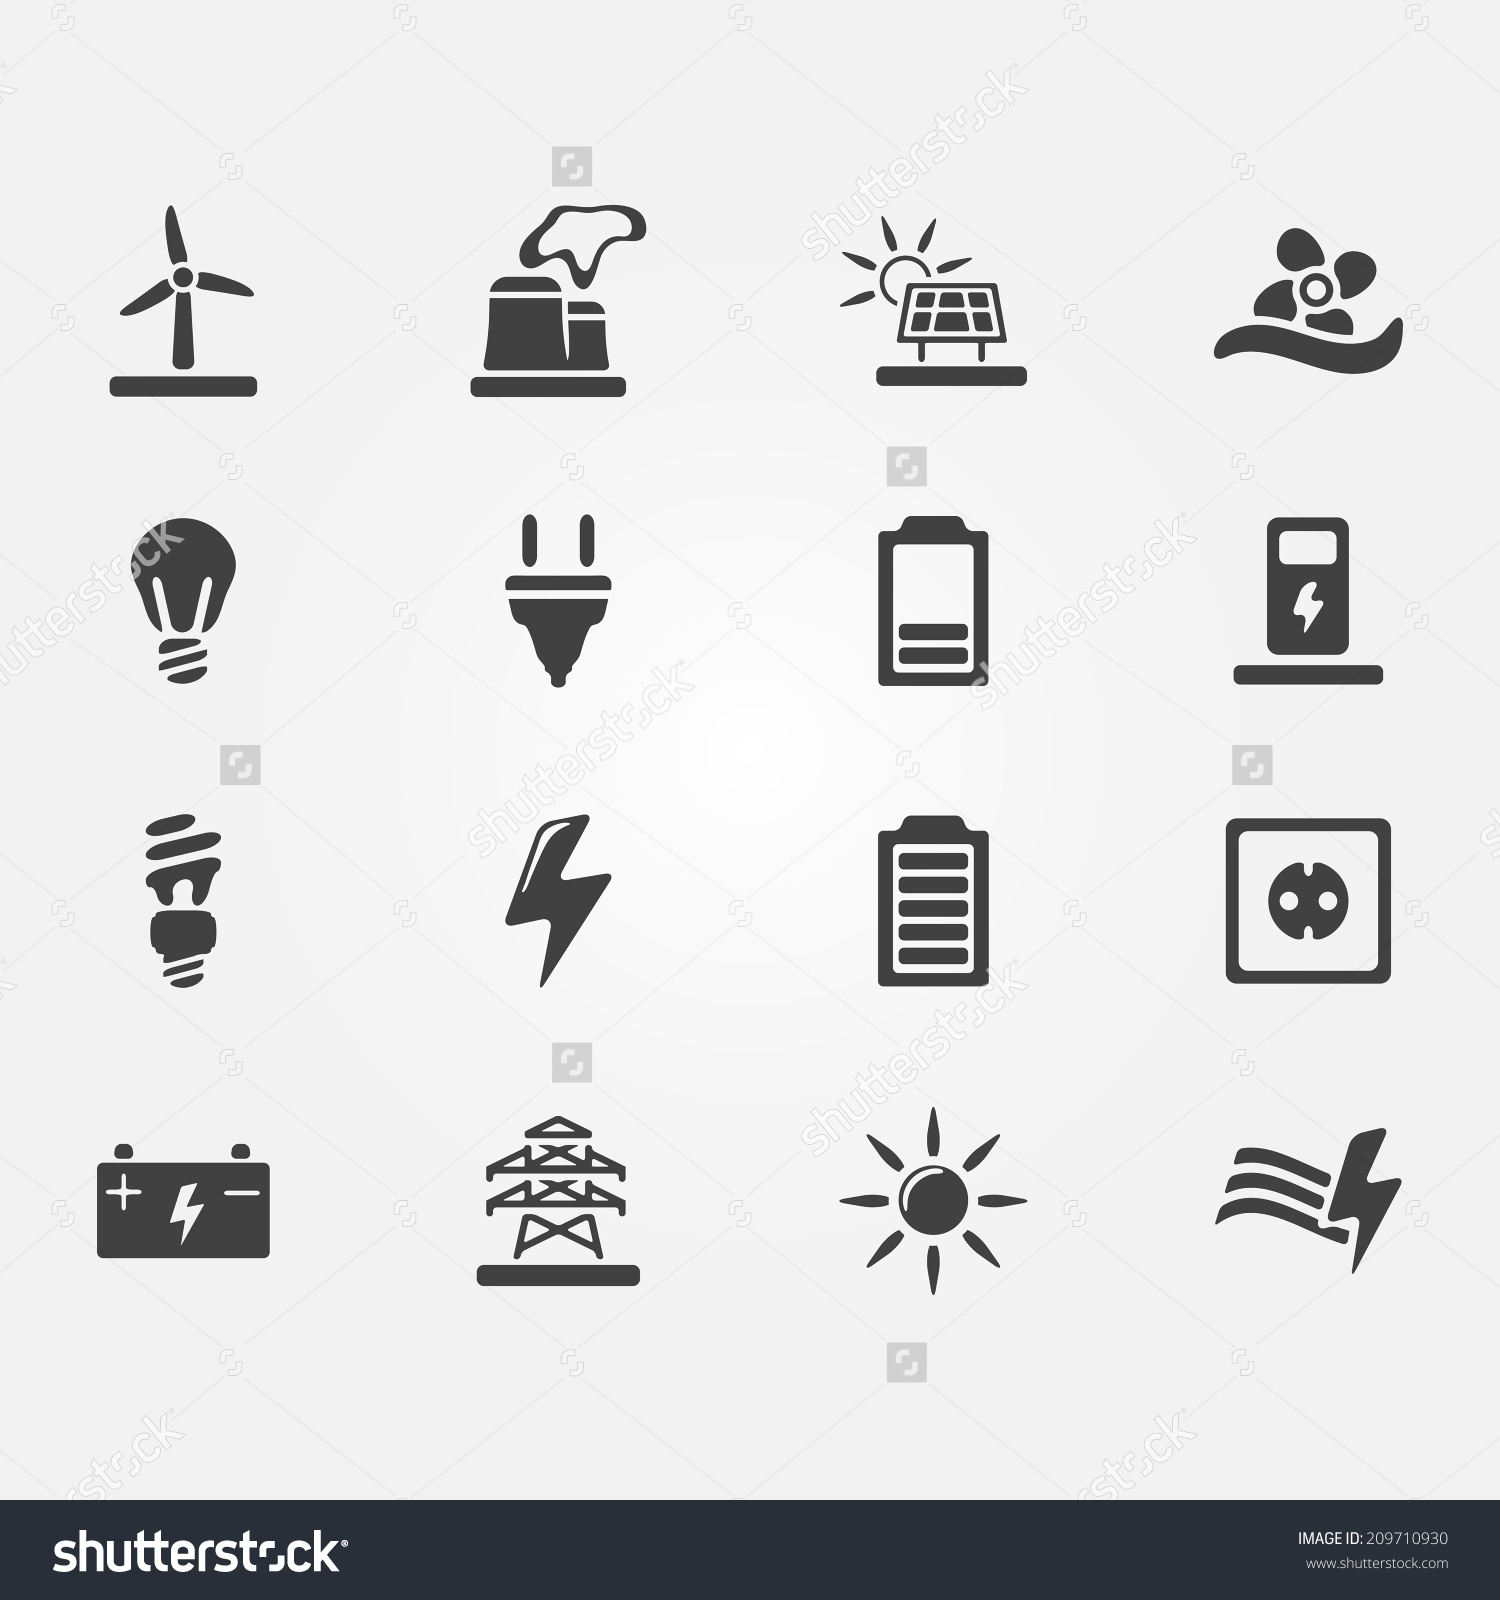 Download Icon Sets For Free! | Signs  Symbols